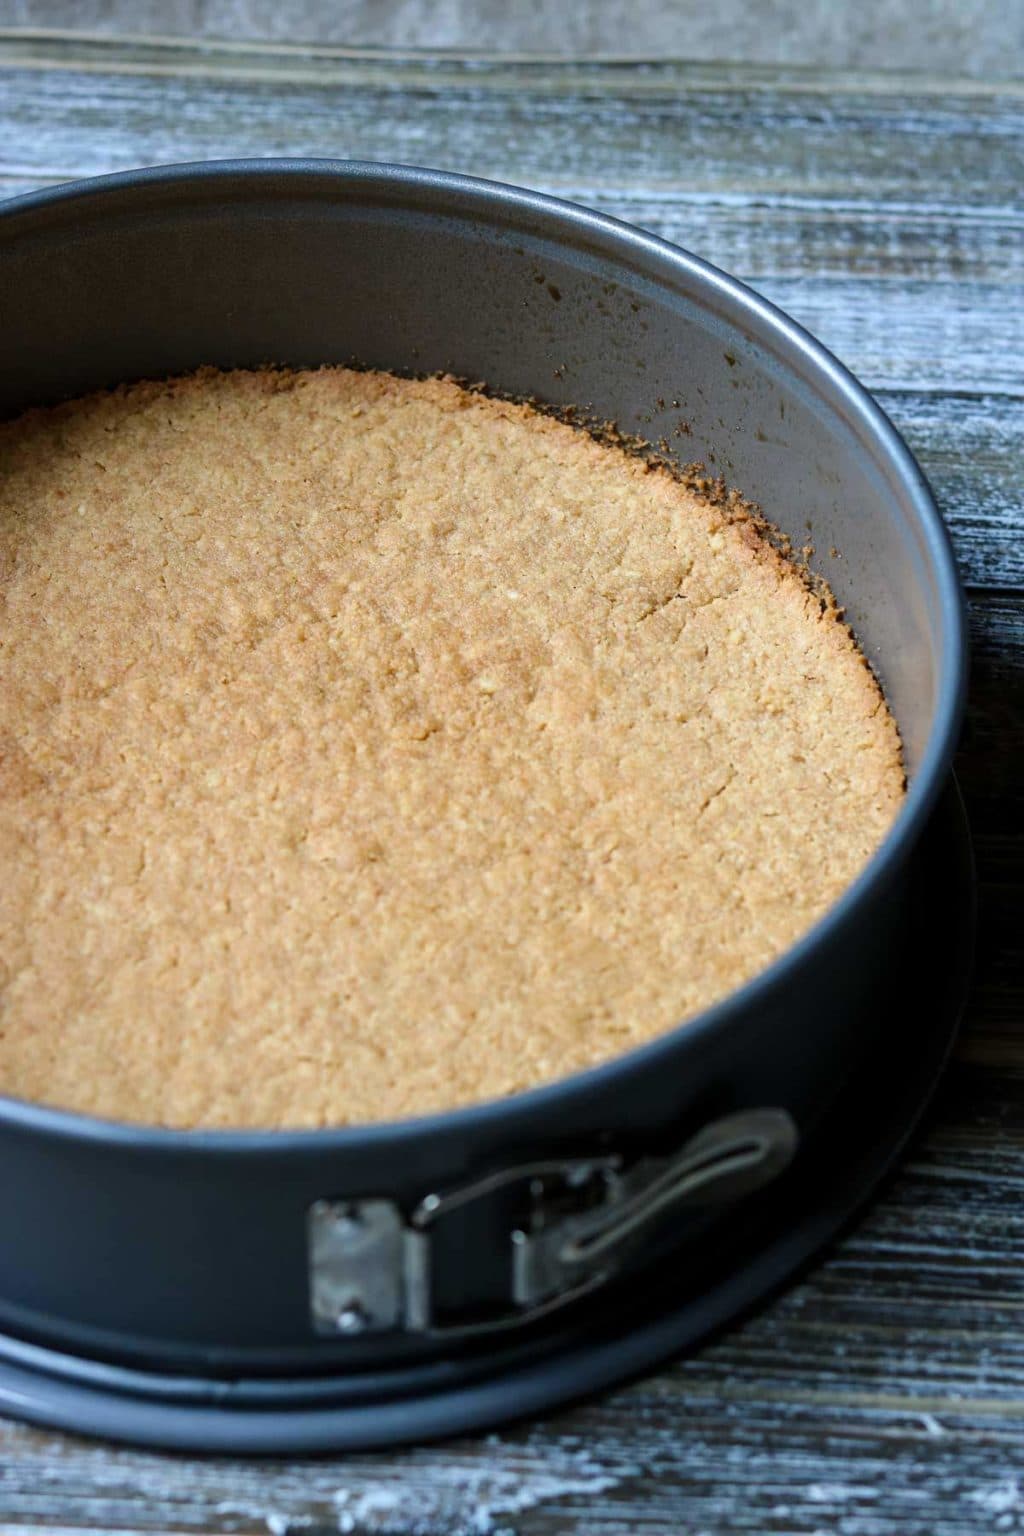 Vanilla Wafer crust baked into a spring form pan